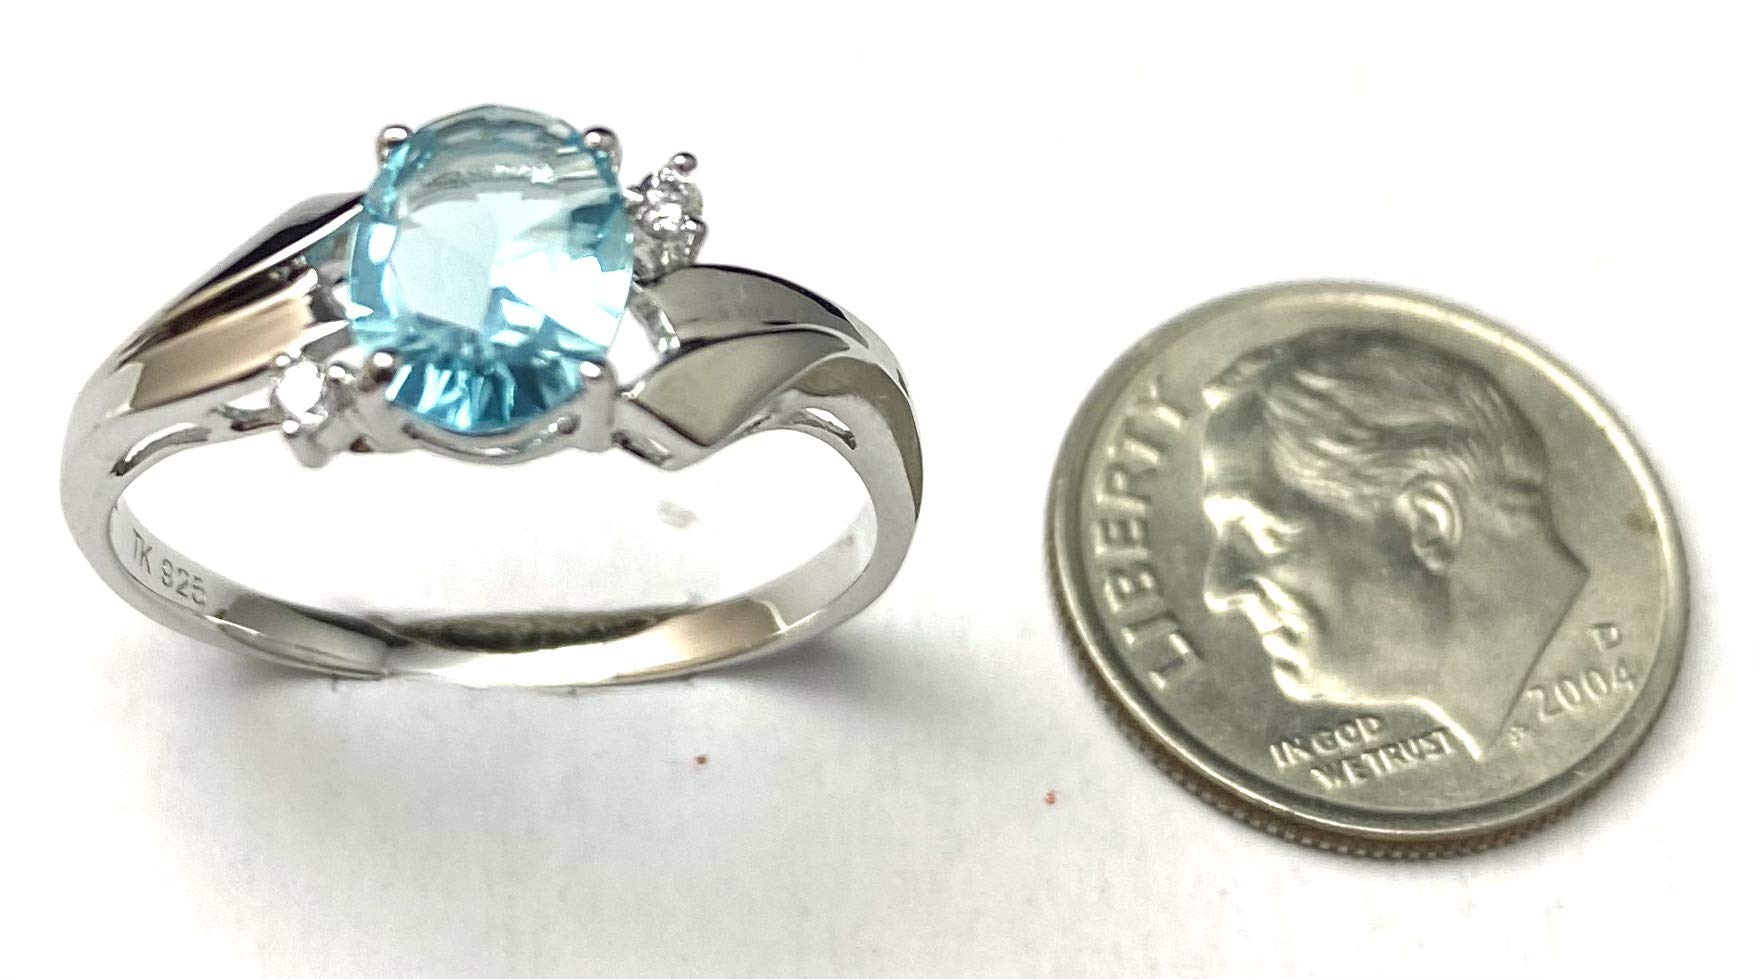 R1165B7 Classic Mt St Helens Blue Helenite Oval Shape (6x8mm) Sterling Silver Ring Size 7